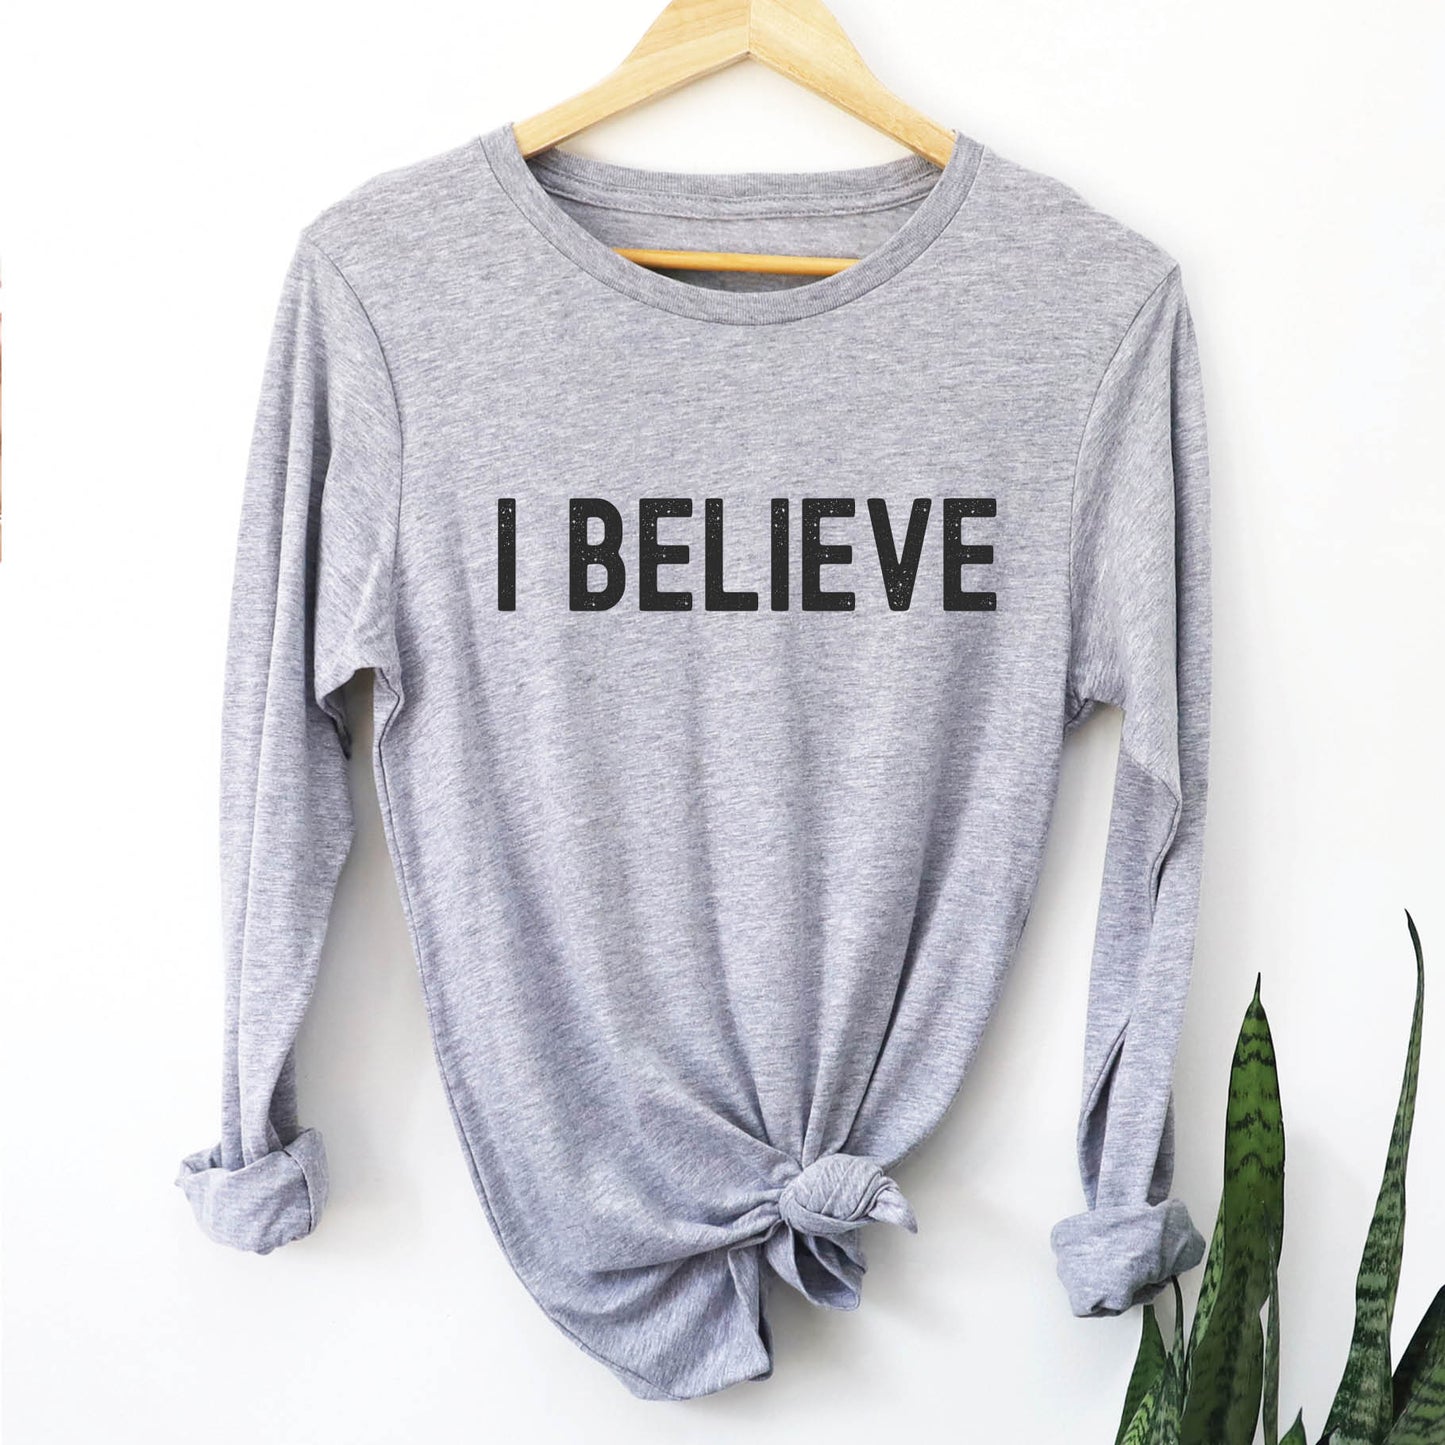 Heather sport gray cozy long sleeve t-shirt with a bold faith-based statement "I BELIEVE" distressed typography design printed in black, created for Christian men and women Jesus believers